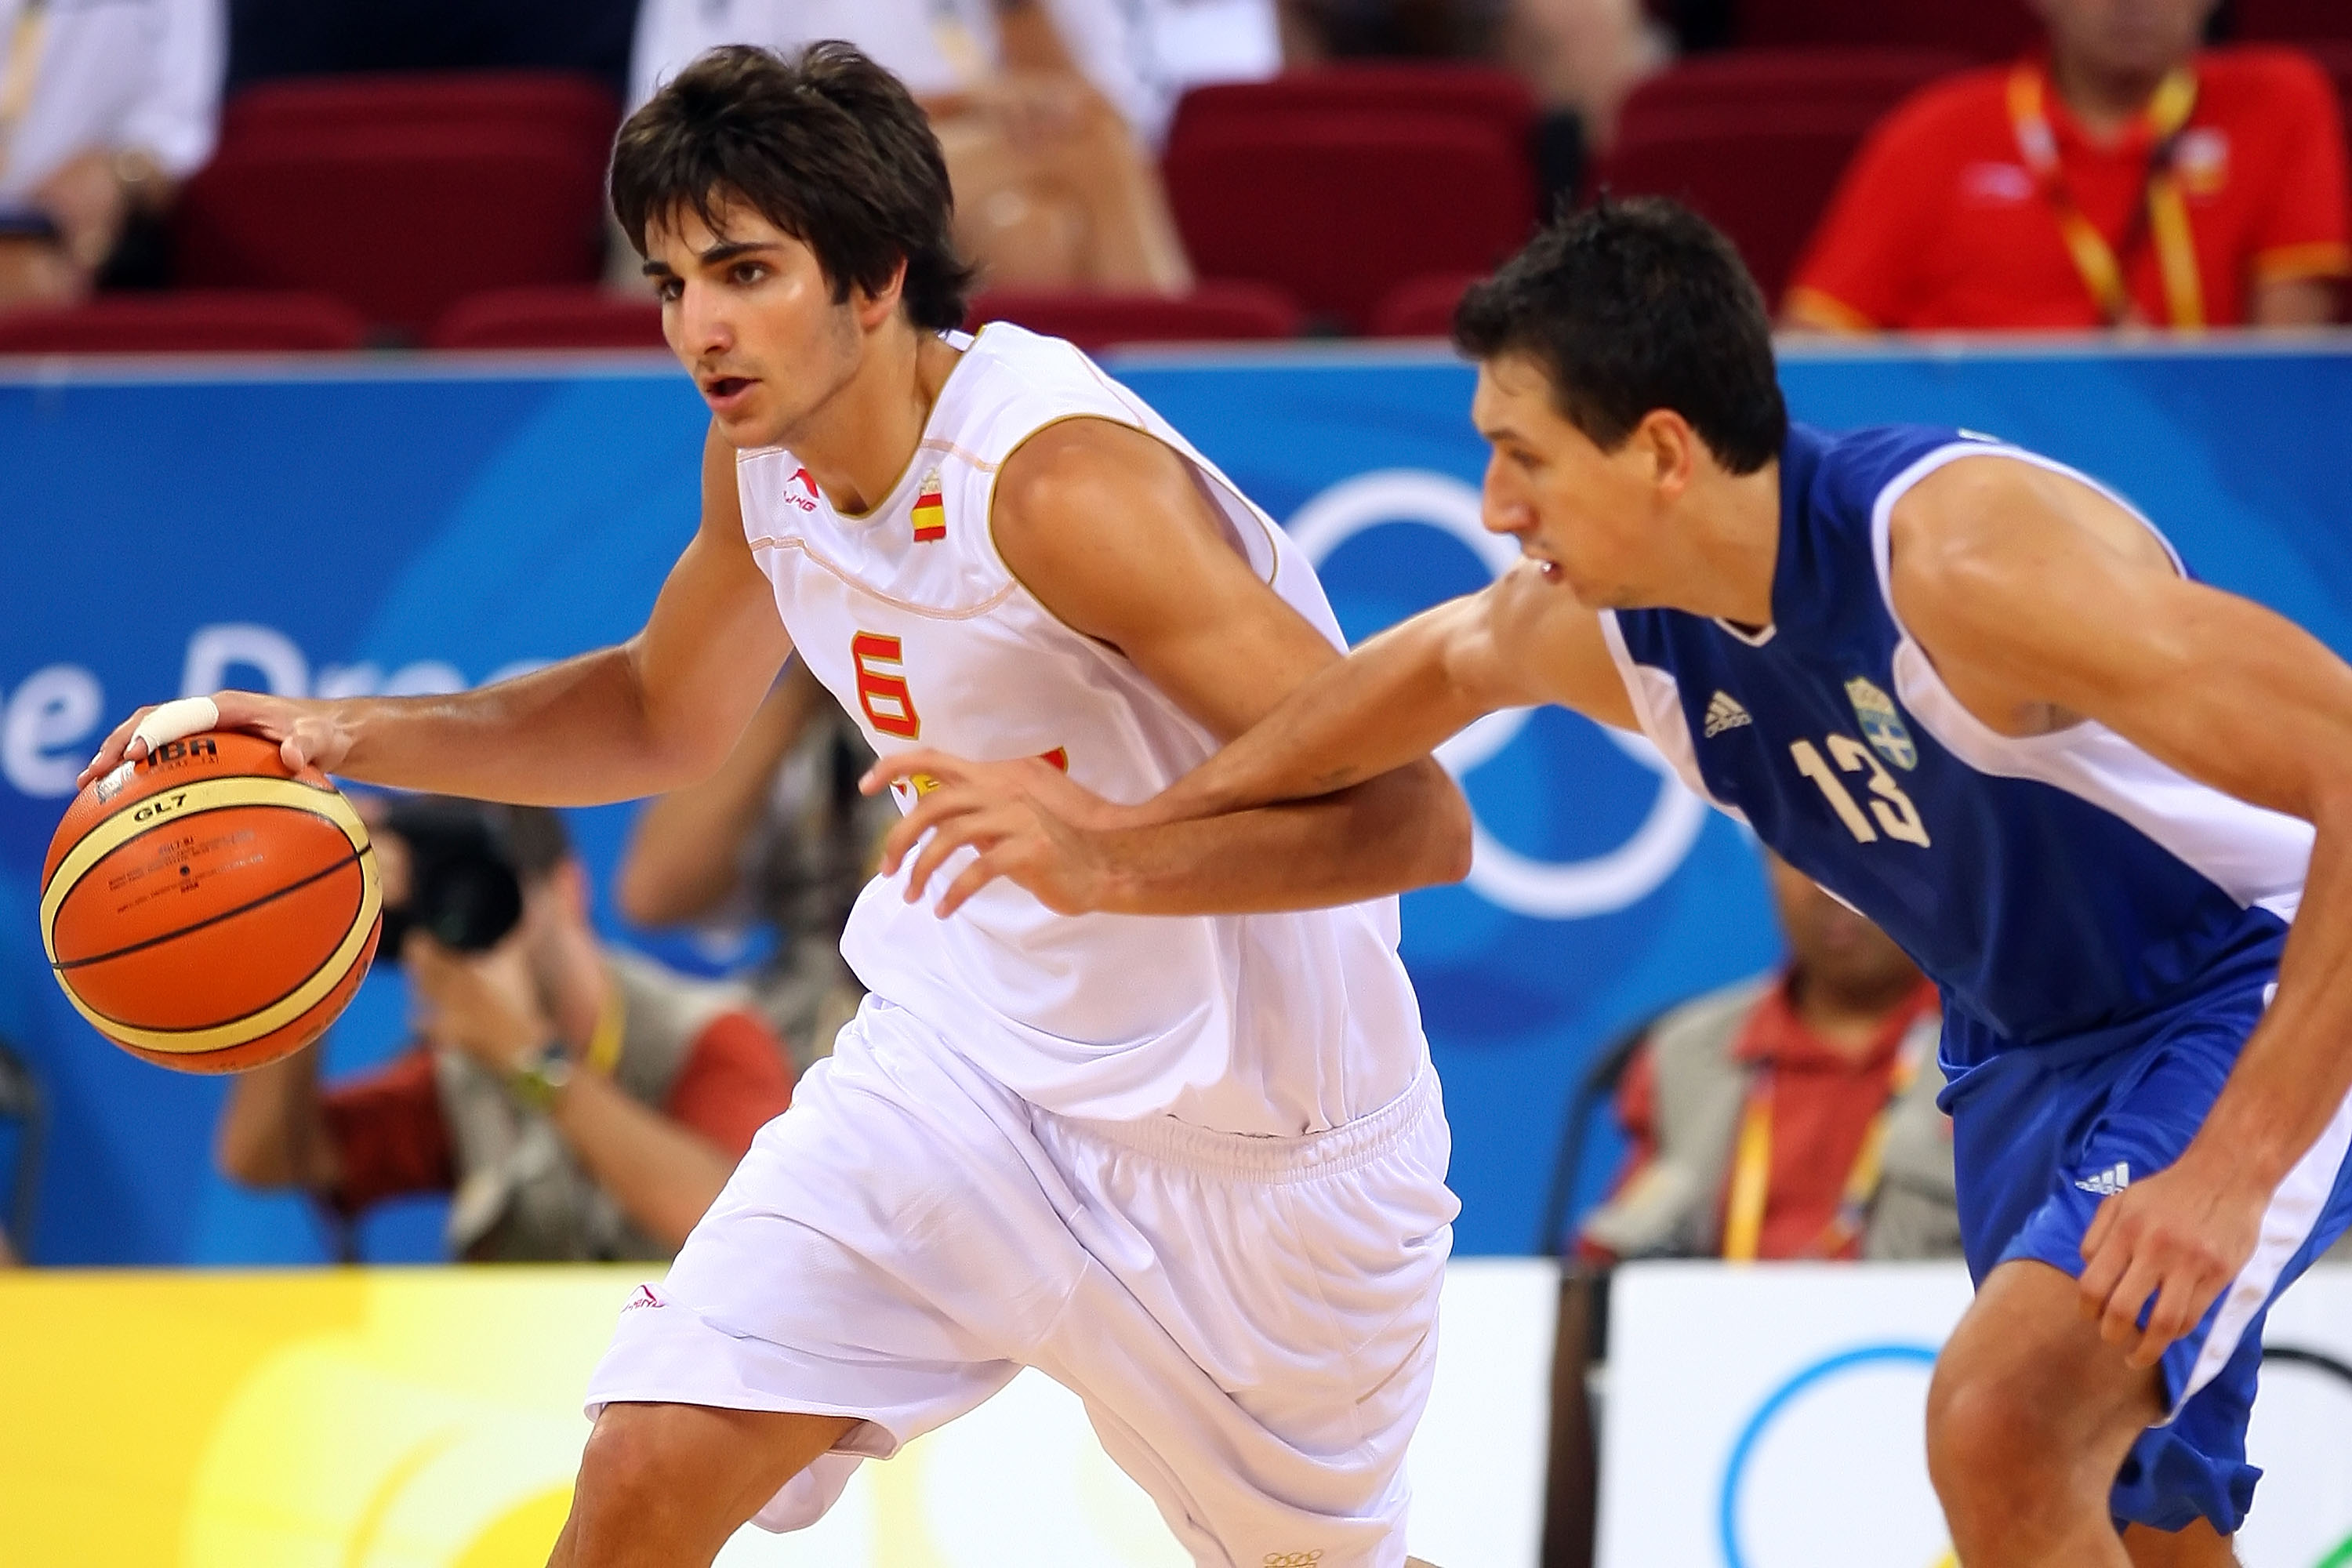 BEIJING - AUGUST 10:  Ricky Rubio #6 of Spain drives on Dimitrios Diamantidis #13 of Greece during the day 2 preliminary game at the Beijing 2008 Olympic Games in the Beijing Olympic Basketball Gymnasium on August 10, 2008 in Beijing, China.  (Photo by Ph